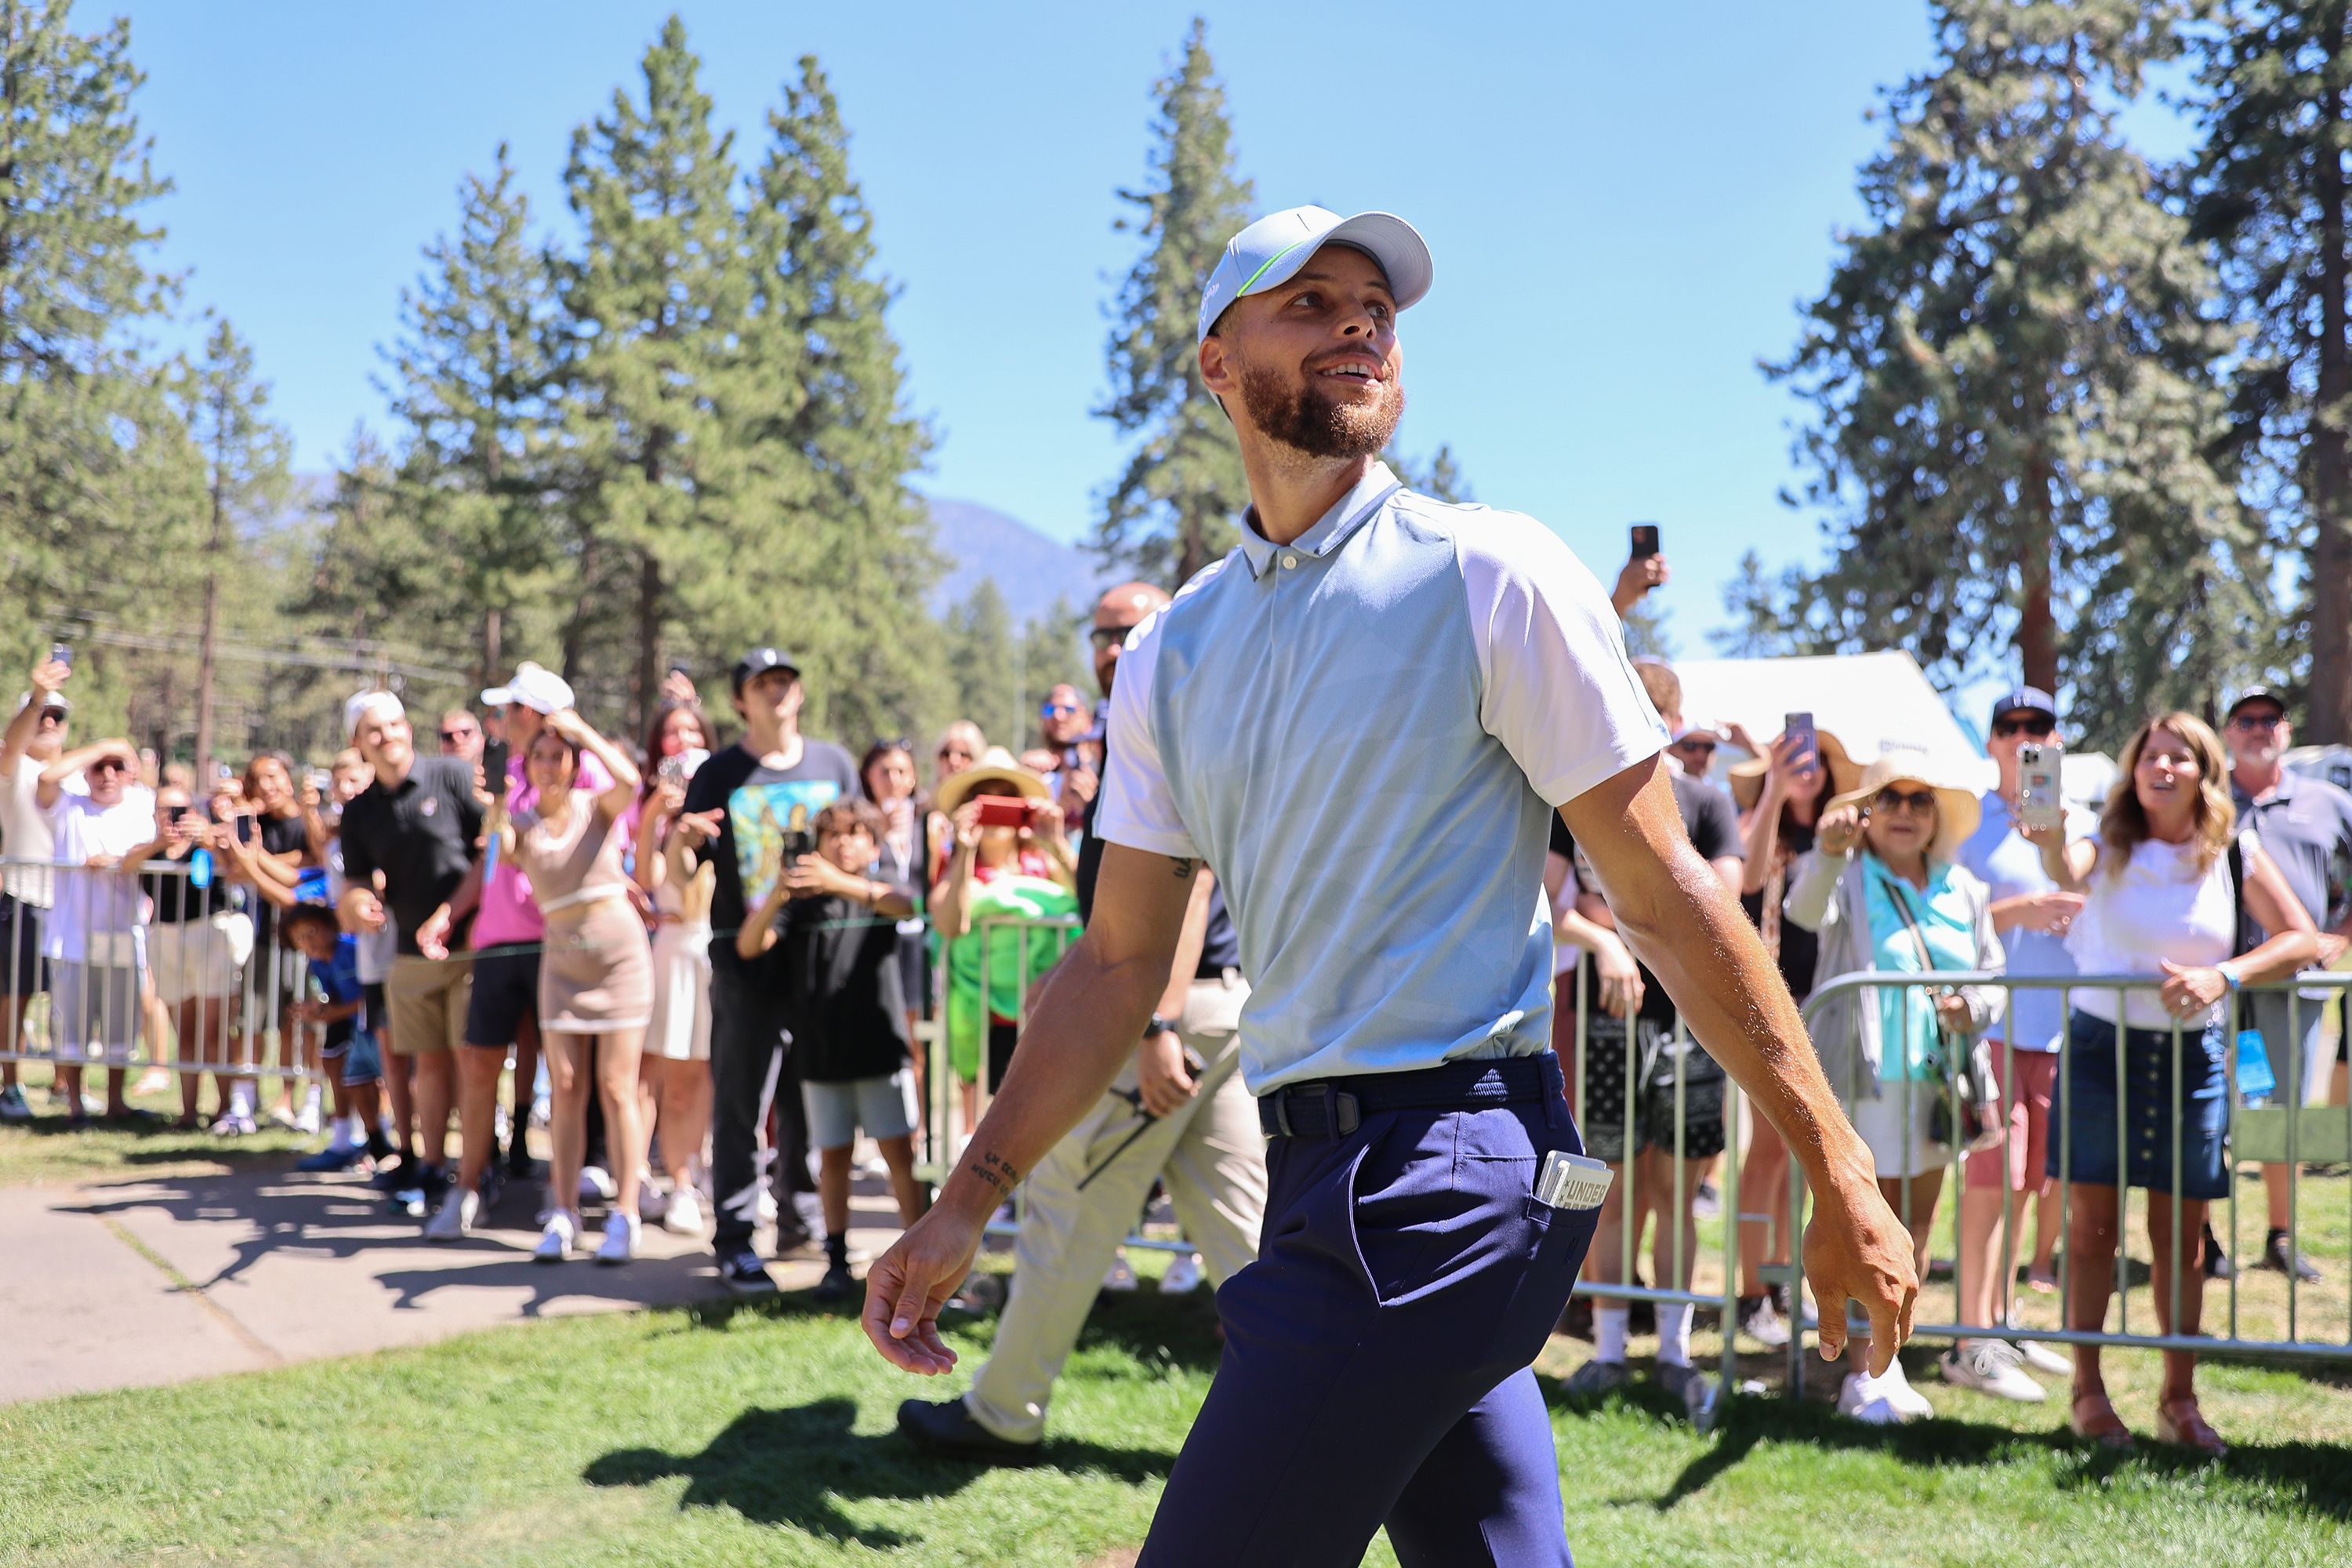 Steph Curry on Game 7 of the 2016 NBA Finals, Golf Handicap, Losing